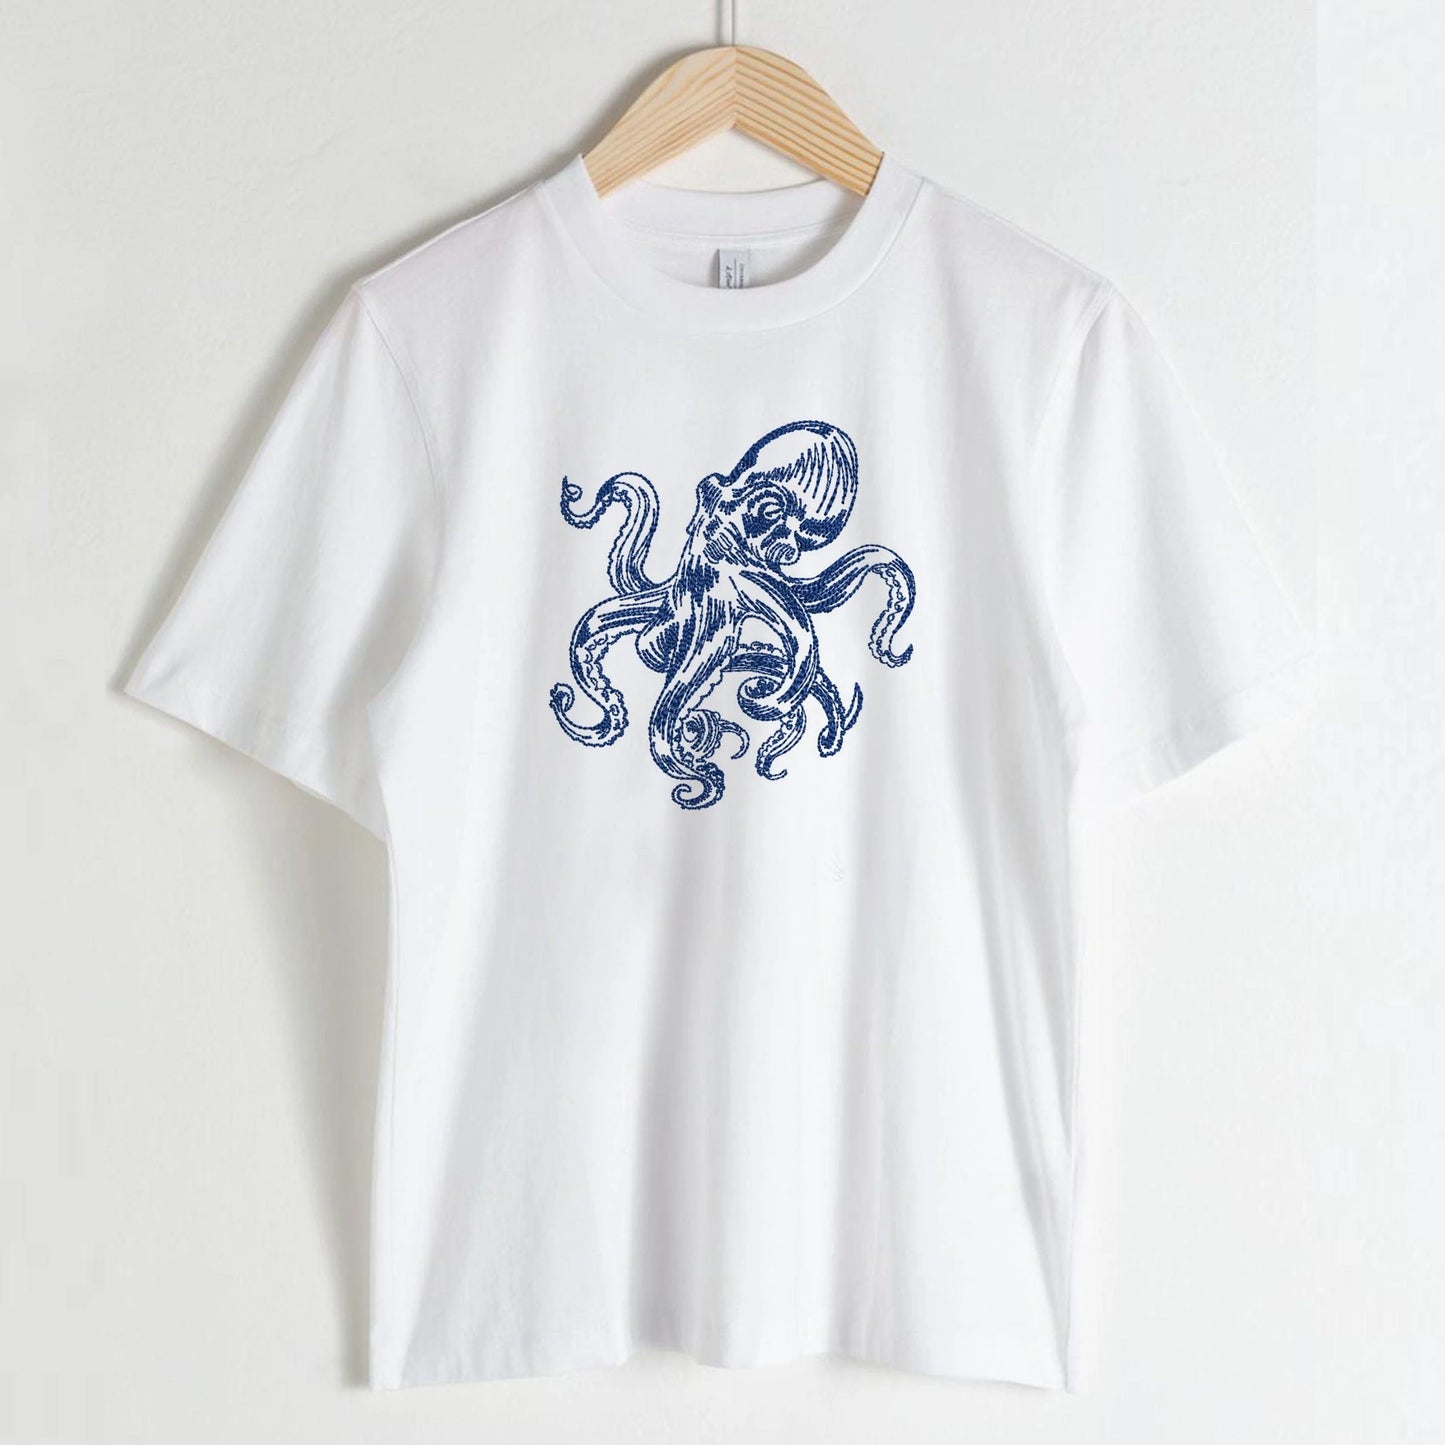 Octopus machine embroidery design on a t-shirt